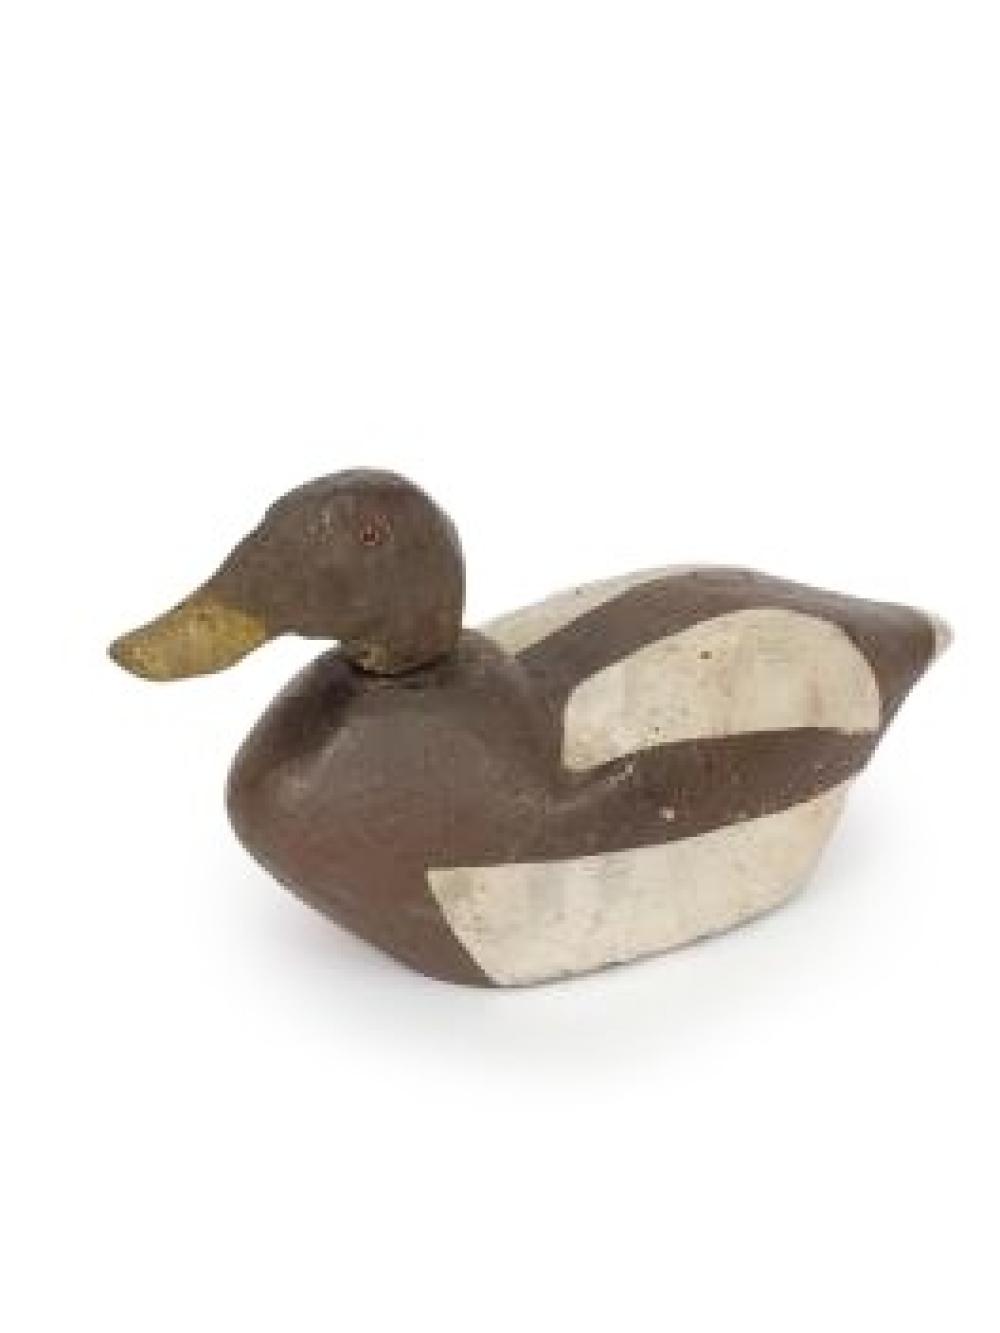 CARVED POLYCHROME DUCK DECOY FROM 2d79cf